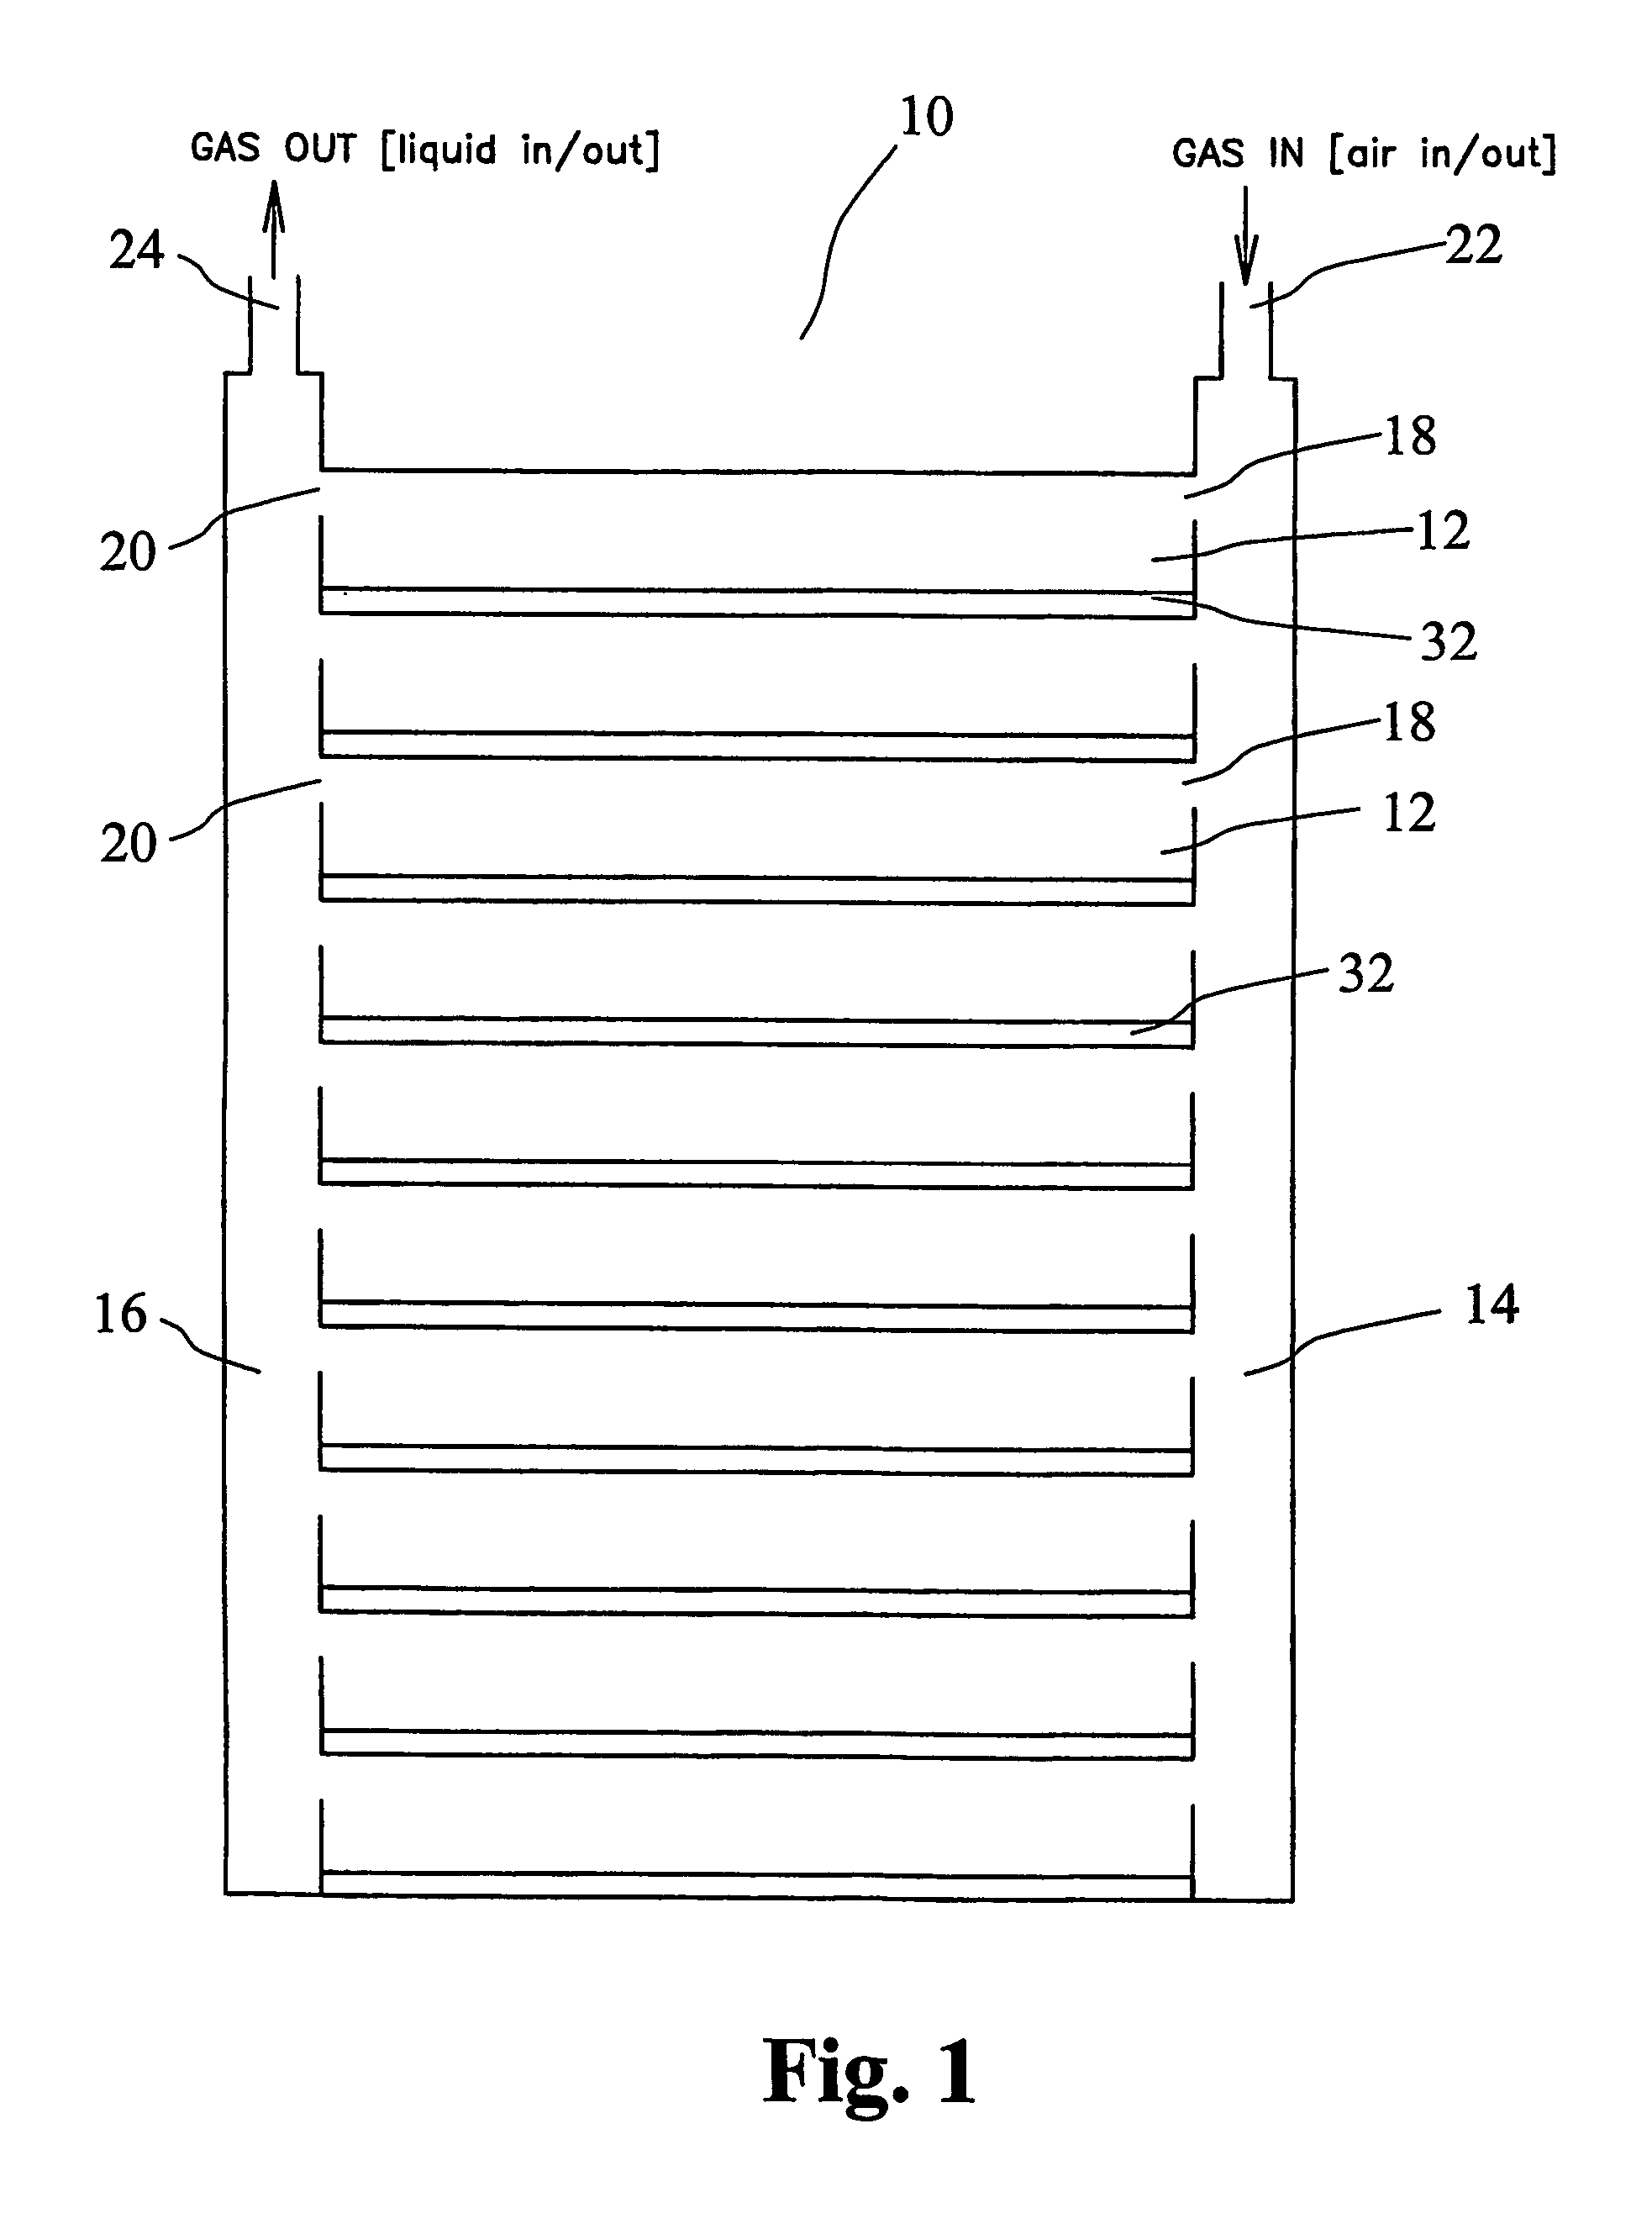 Tray stack adapted for active gassing